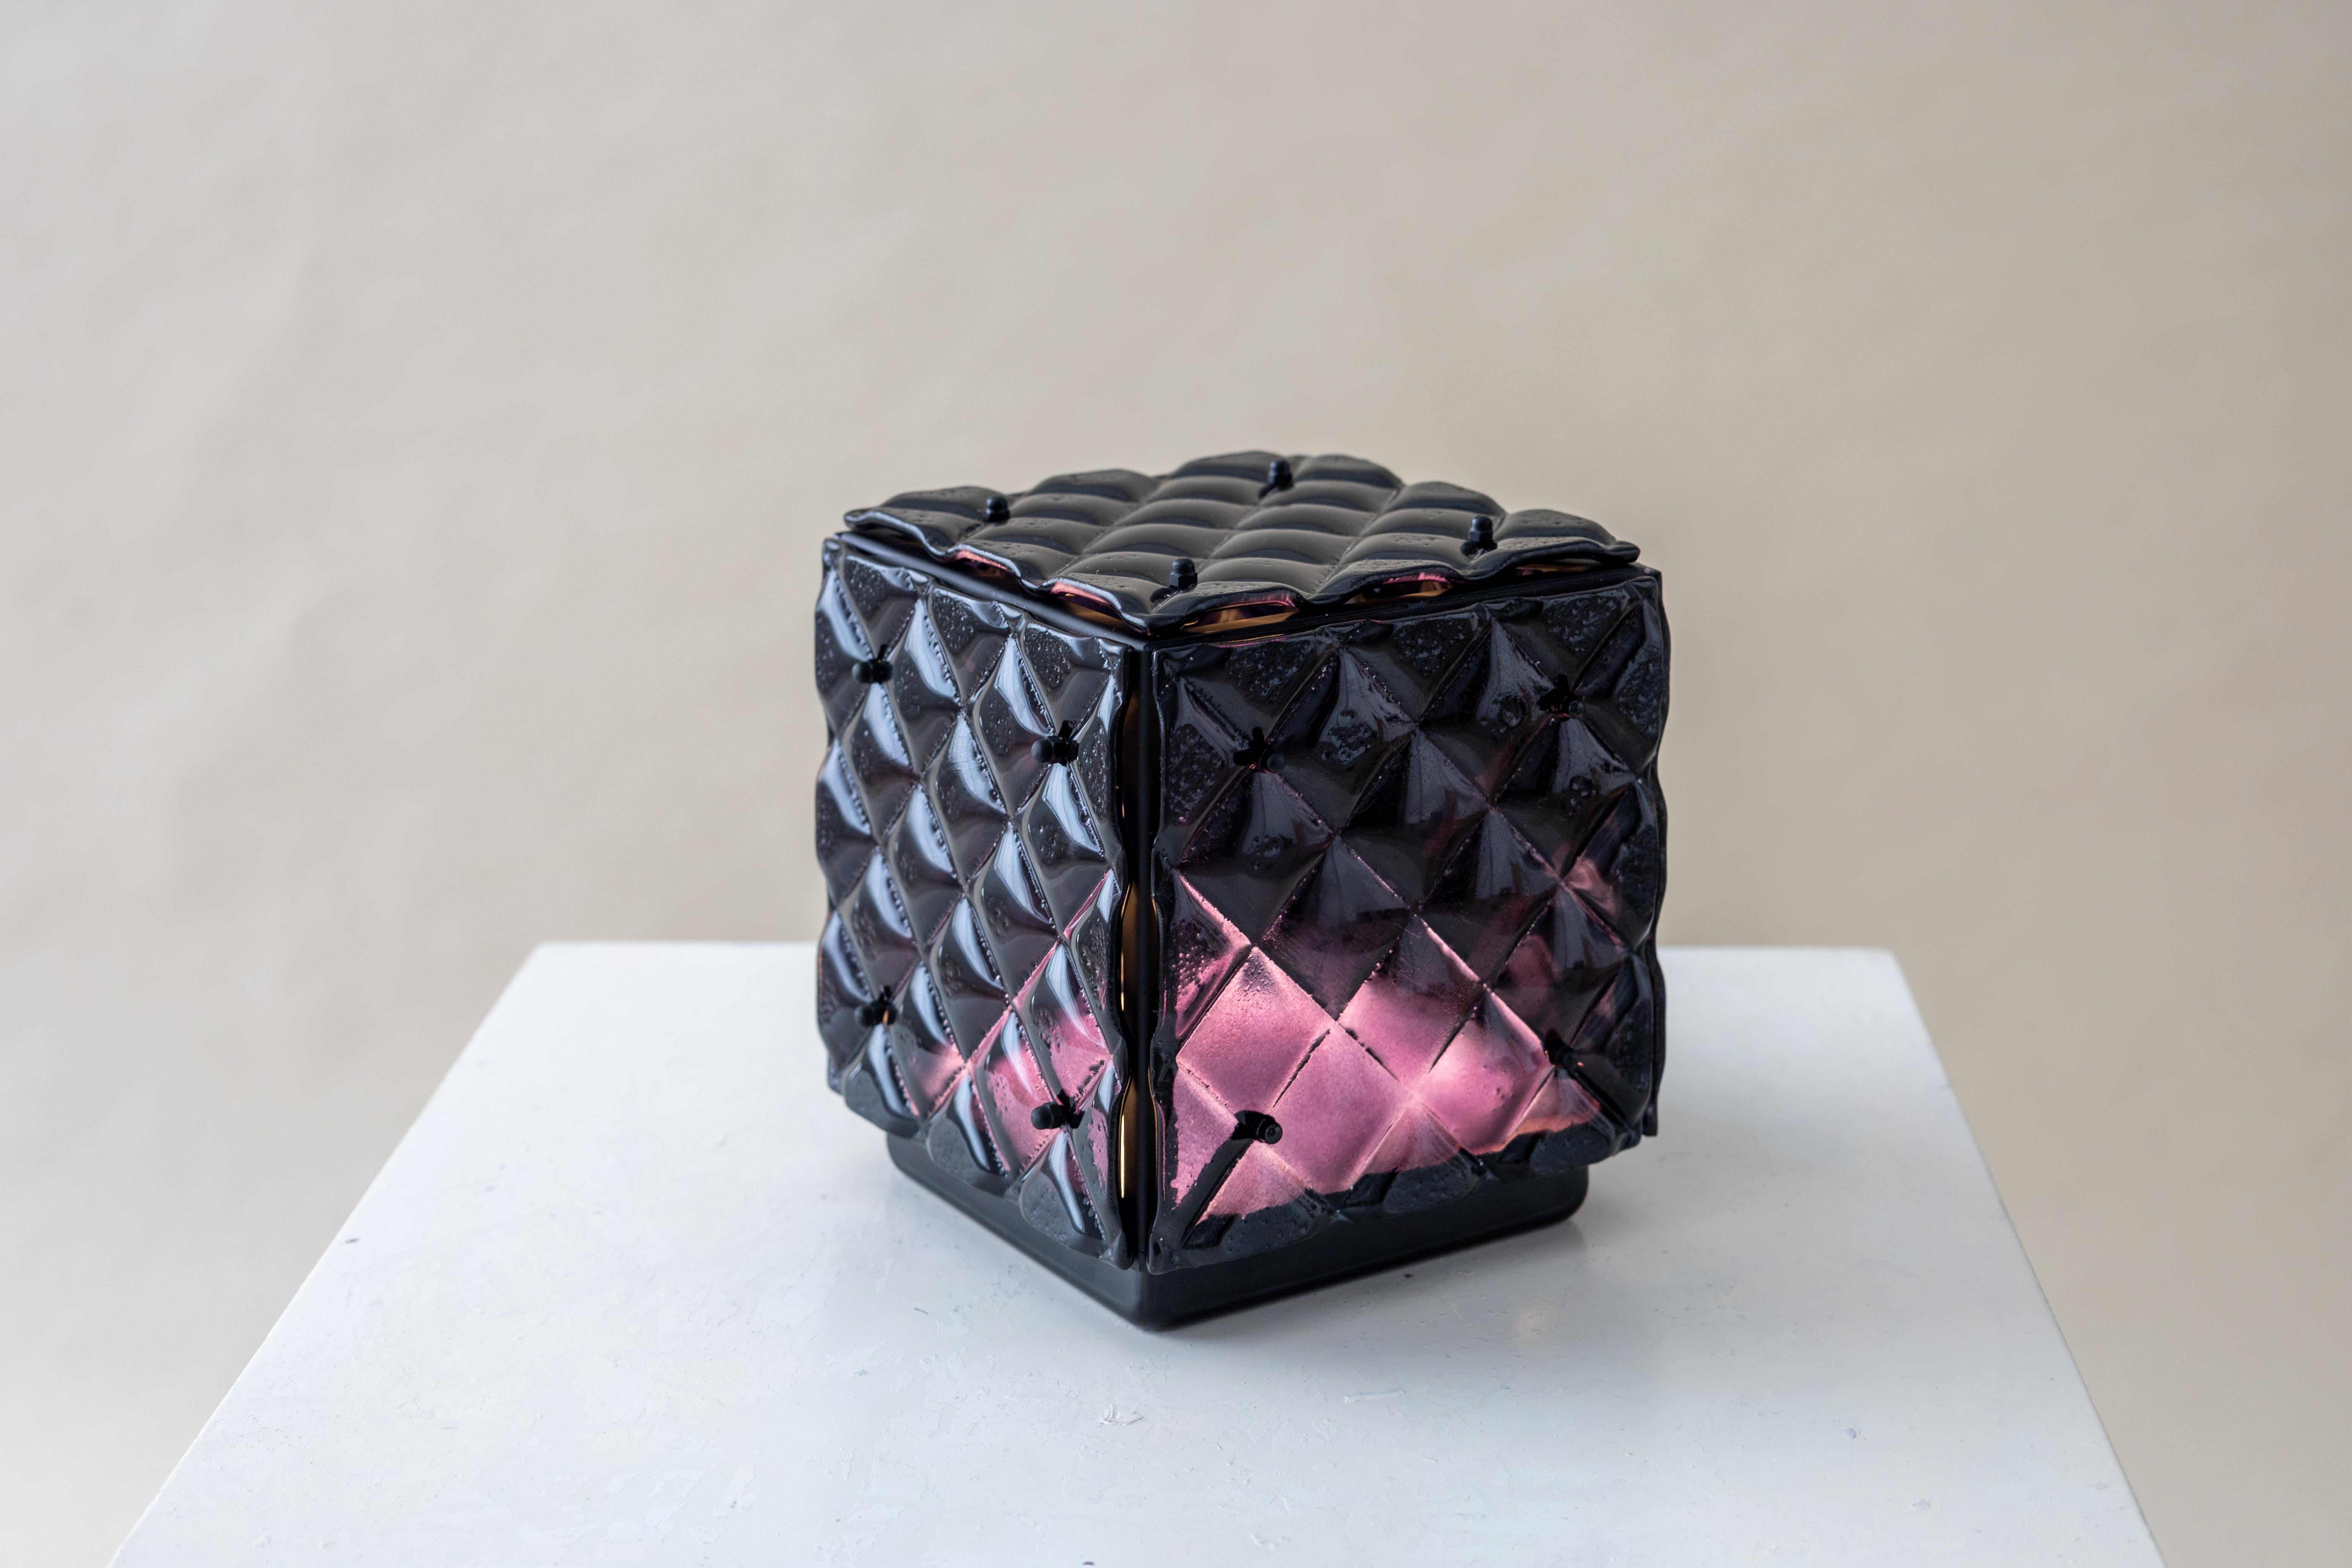 Spanish Glass Cube Lamp Black Ambient Light Artisanal Fused Glass Contemporary Design For Sale